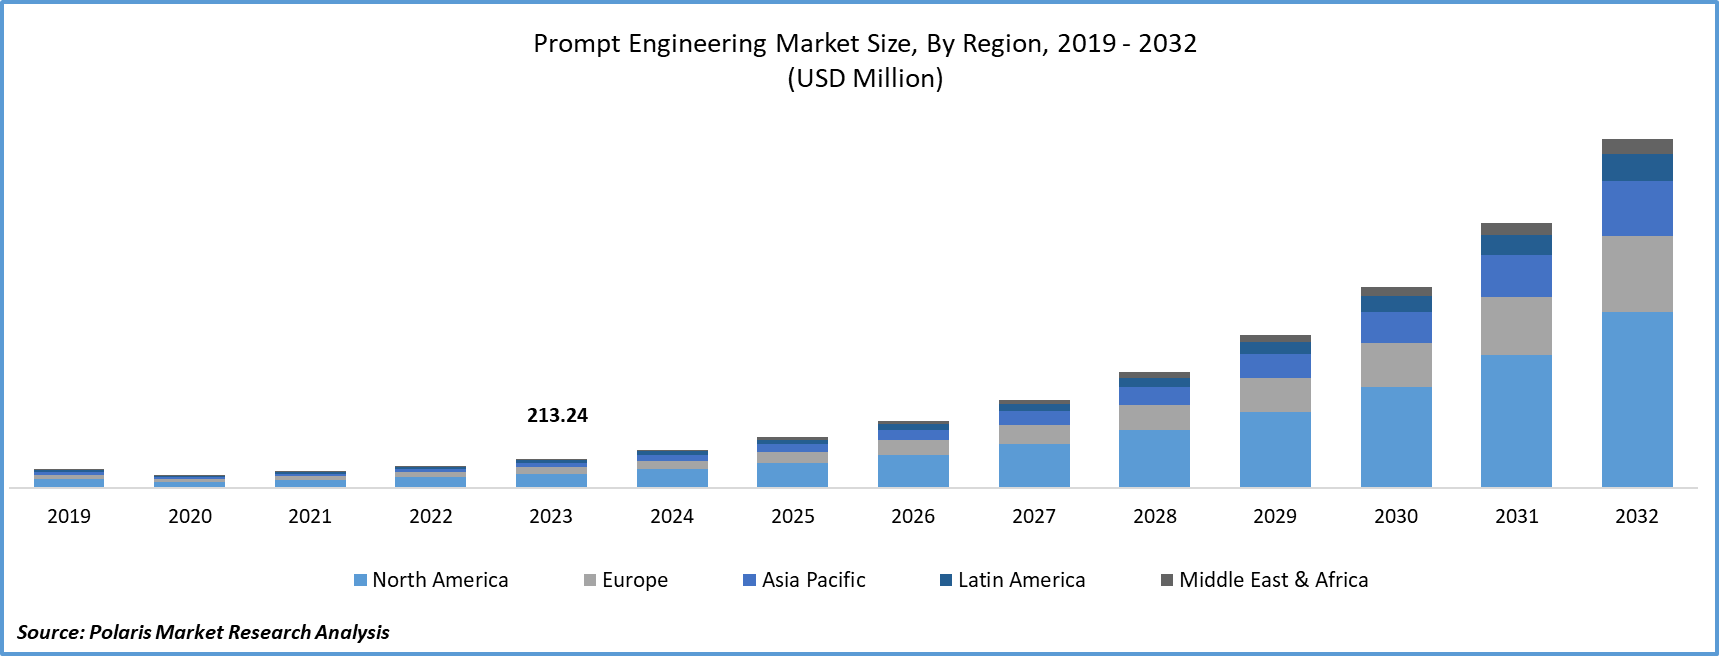 Prompt Engineering Market Size